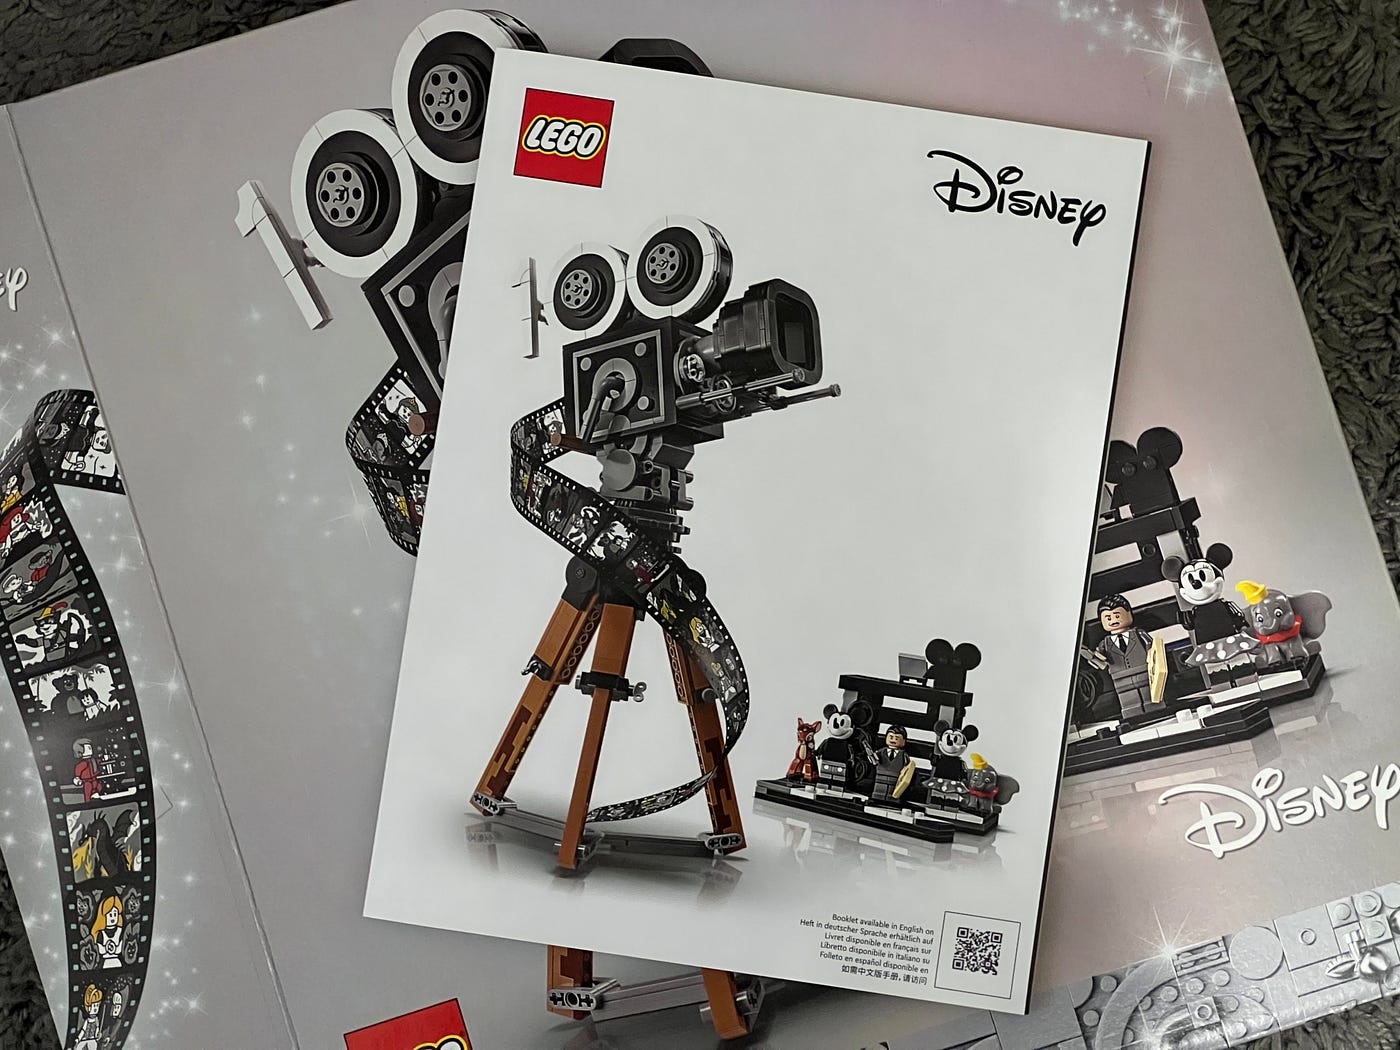 LEGO's Walt Disney Tribute Camera Is A Missed Opportunity